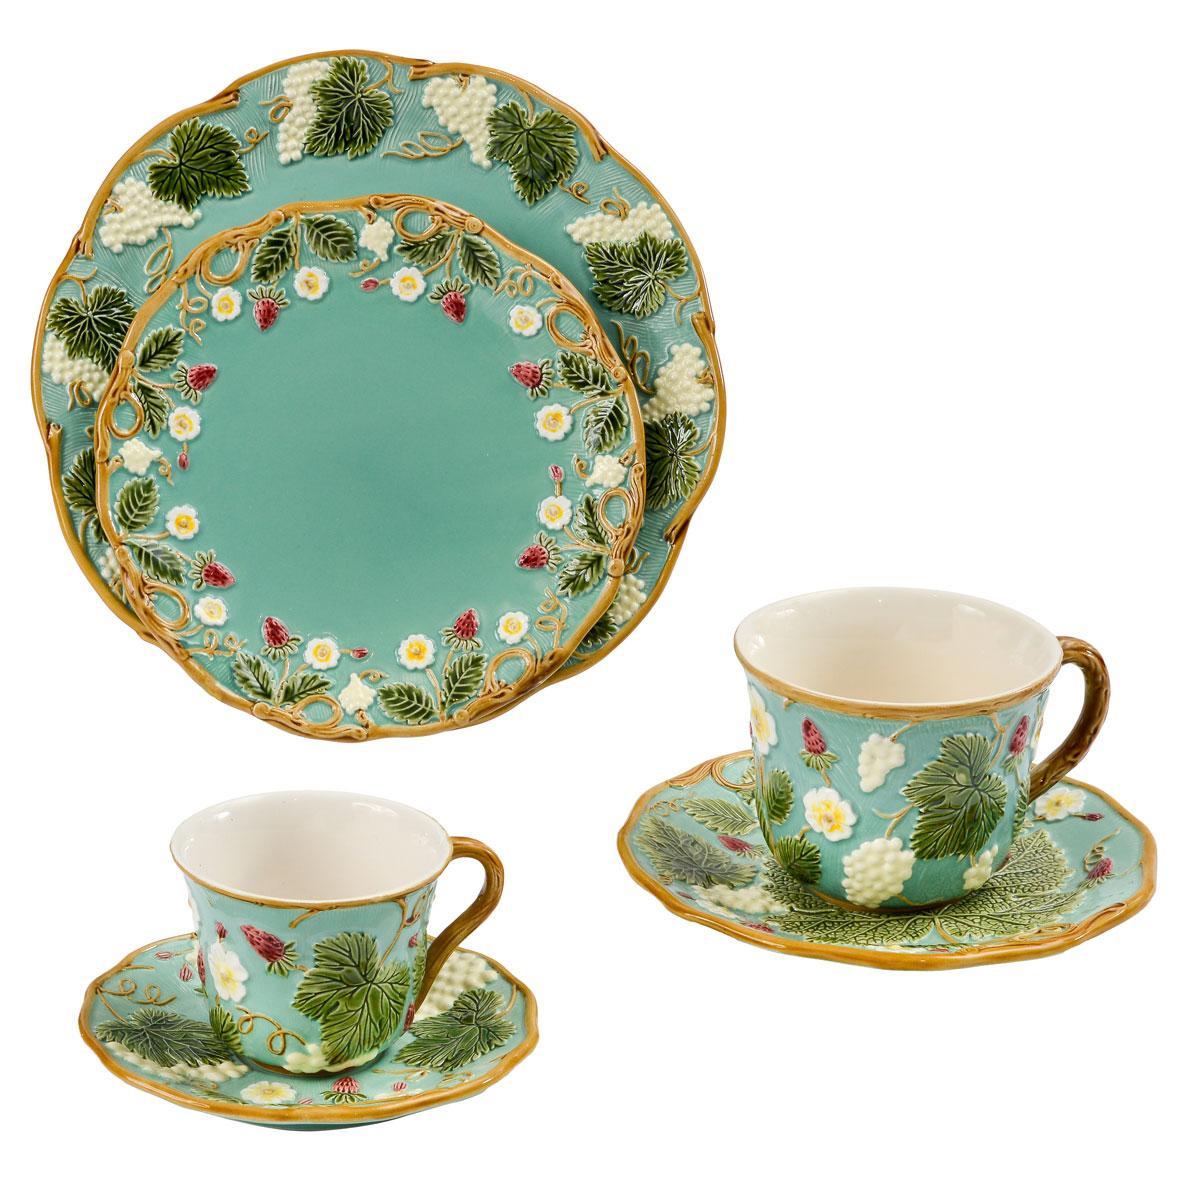 Flowery Tea Cups for 2 